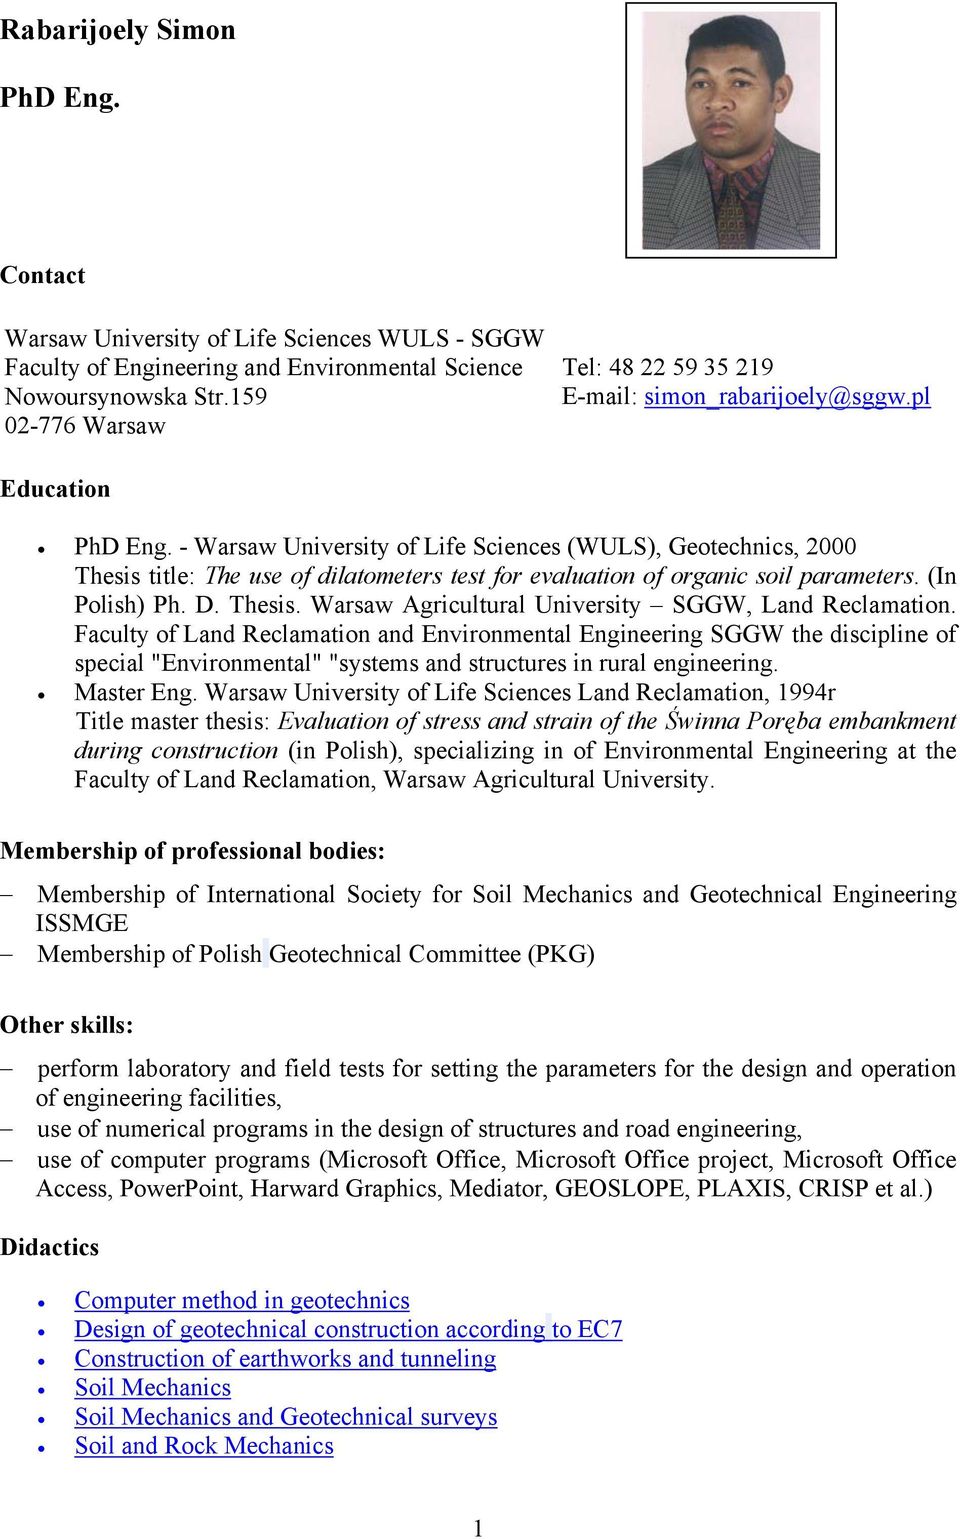 - Warsaw University of Life Sciences (WULS), Geotechnics, 2000 Thesis title: The use of dilatometers test for evaluation of organic soil parameters. (In Polish) Ph. D. Thesis. Warsaw Agricultural University SGGW, Land Reclamation.